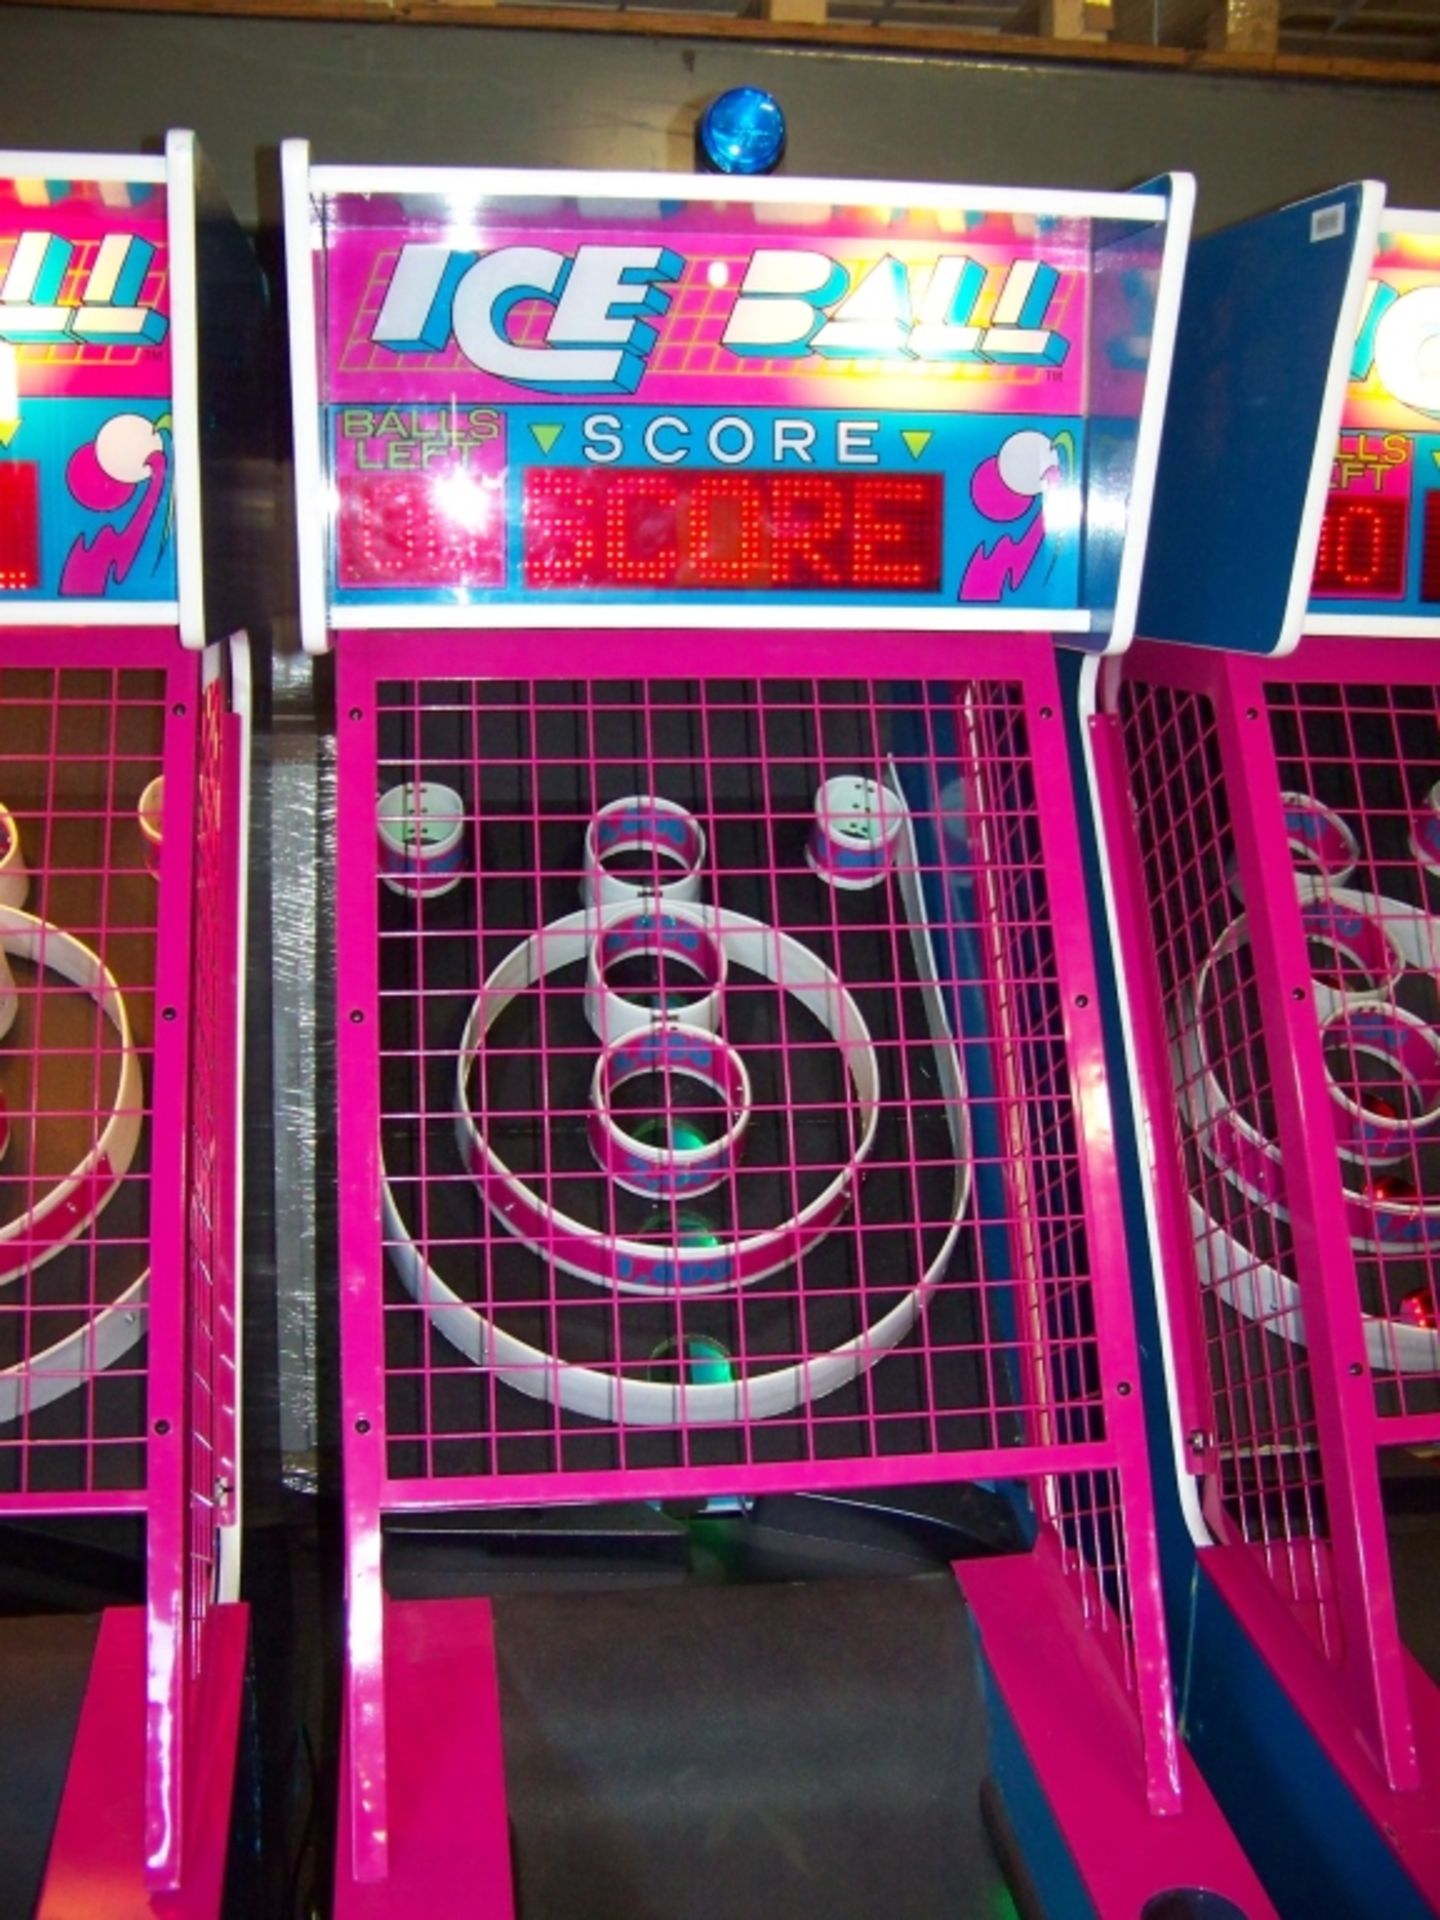 ICE-BALL ALLEY ROLLER REDEMPTION GAME - Image 2 of 3